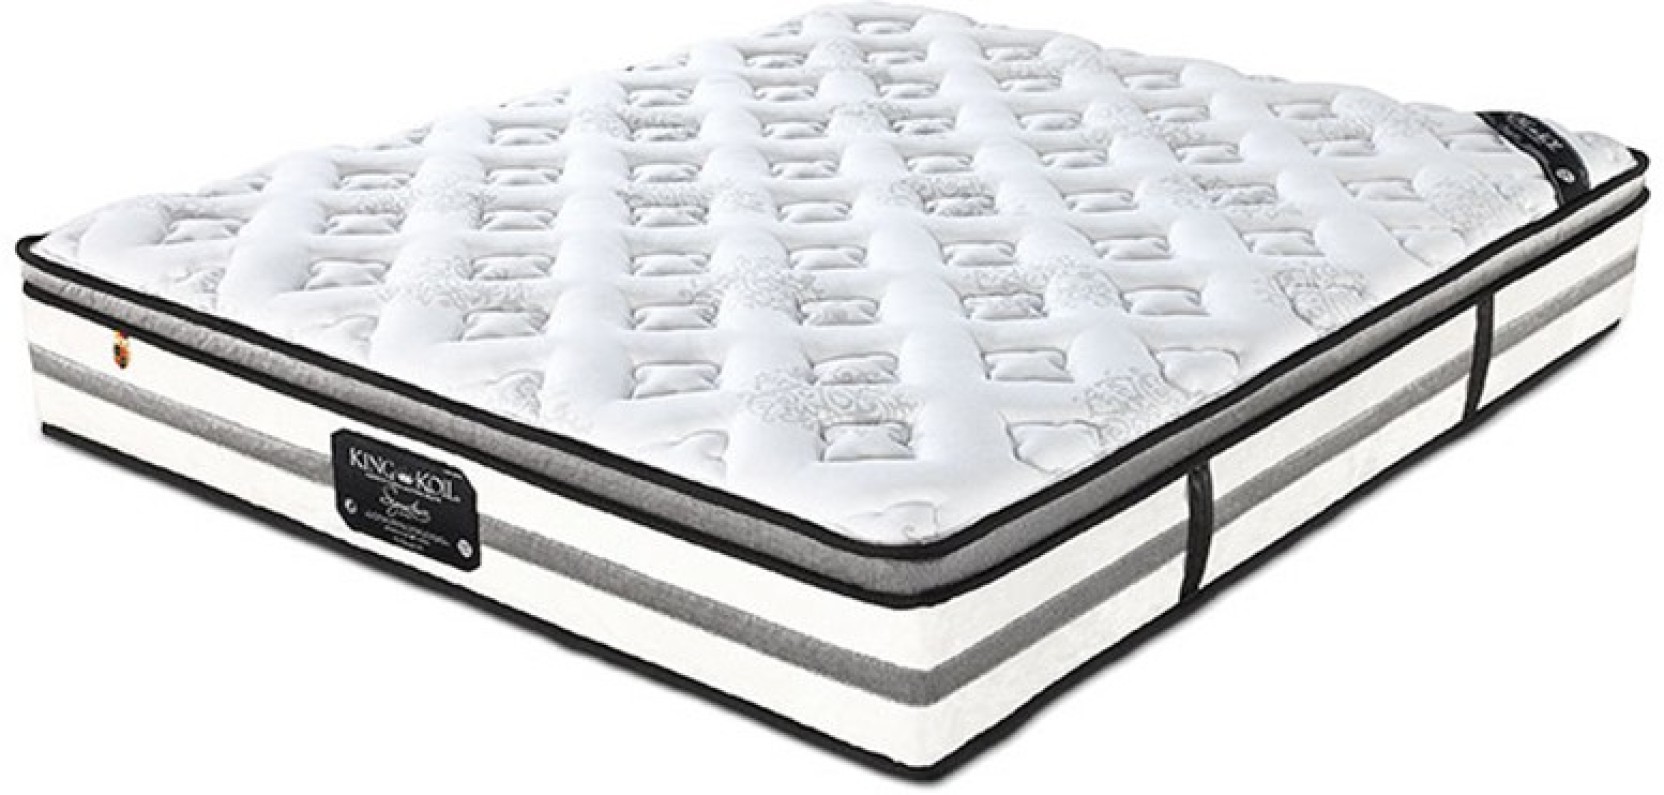 king koil deluxe suites mattress price